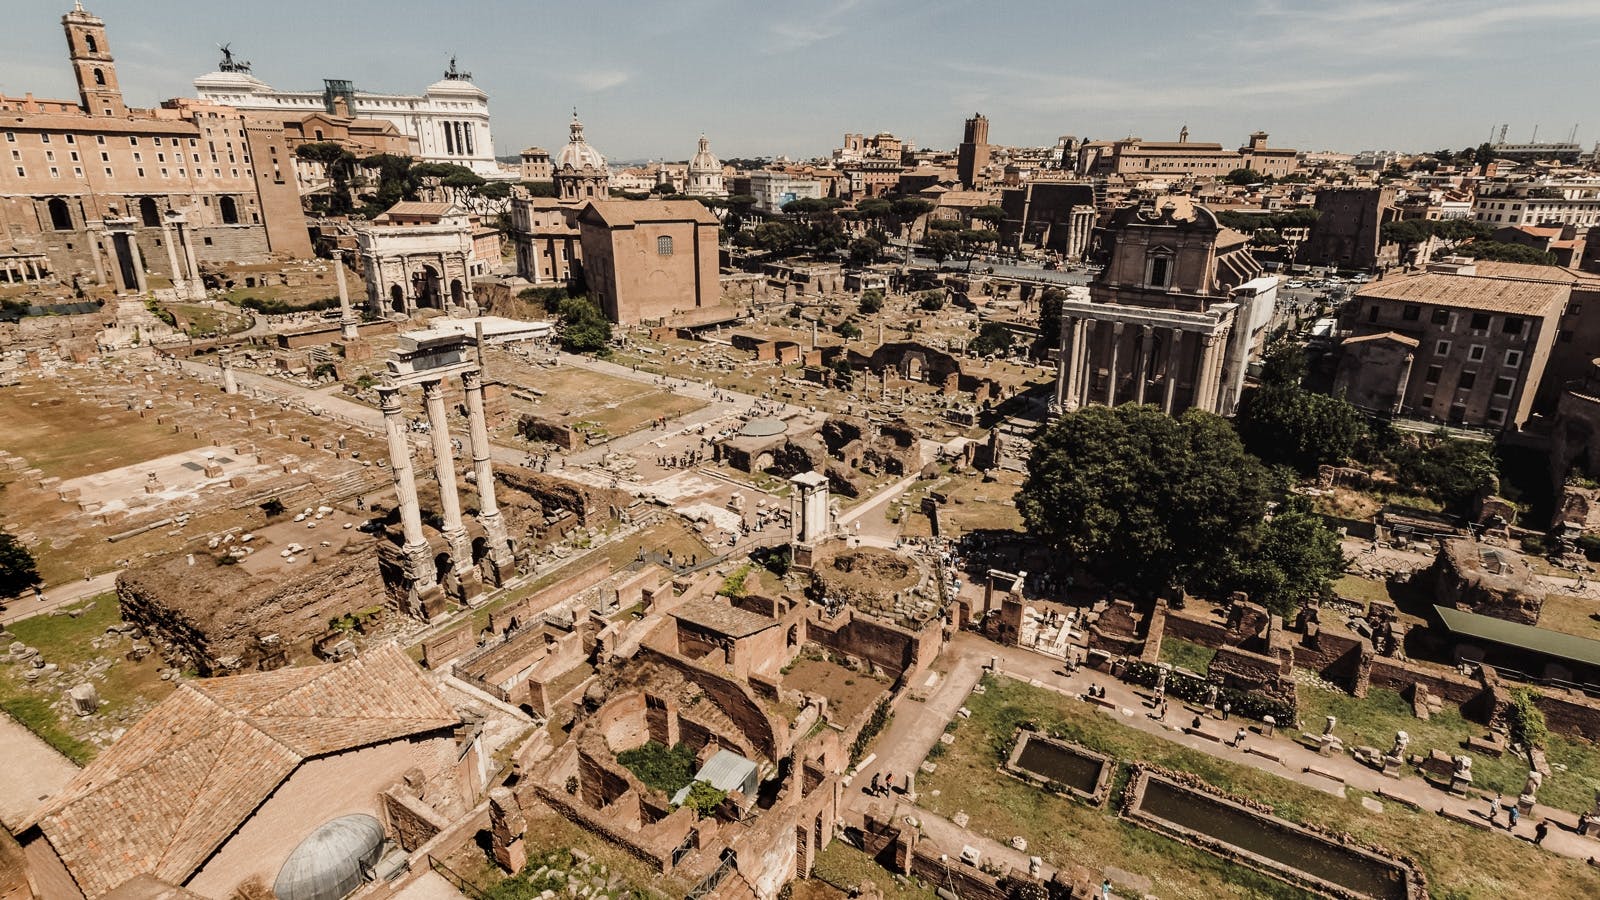 Best of Rome, Walking Tour and Quick Access to Roman Forum